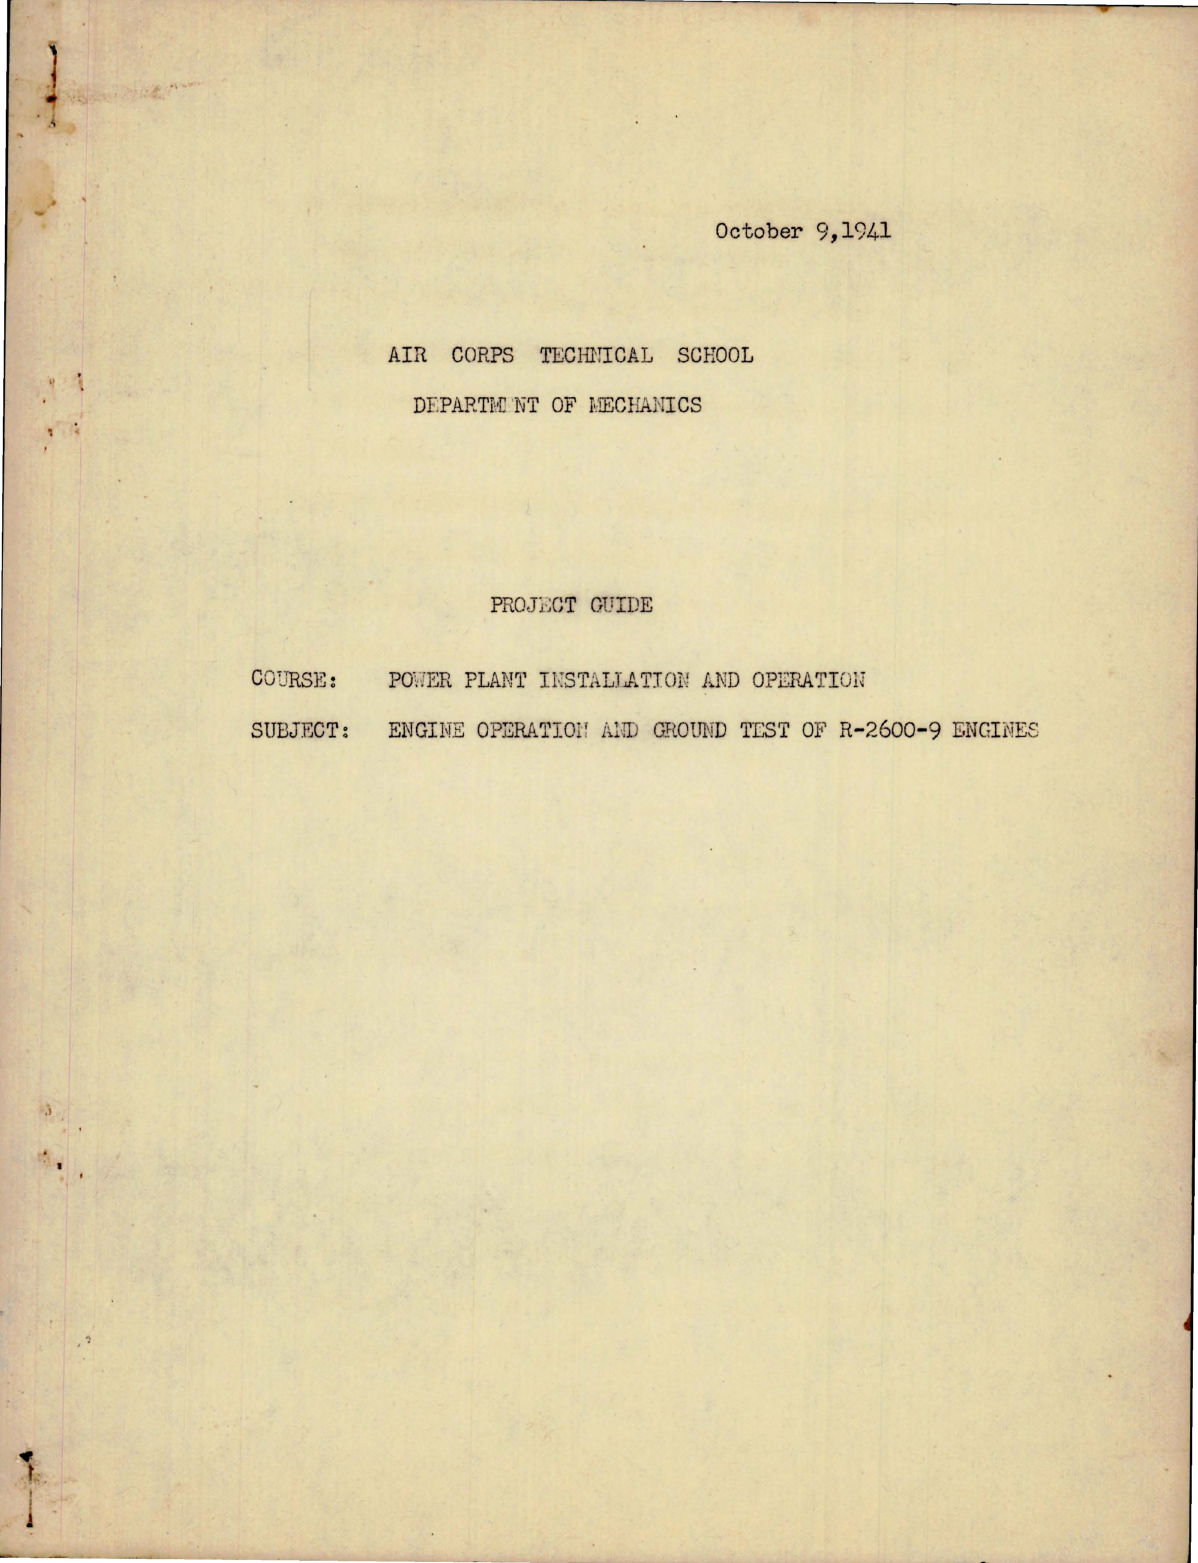 Sample page 1 from AirCorps Library document: Project Guide for Power Plant Installation and Operation - Engine Operation and Ground Test on R-2600-9 Engines